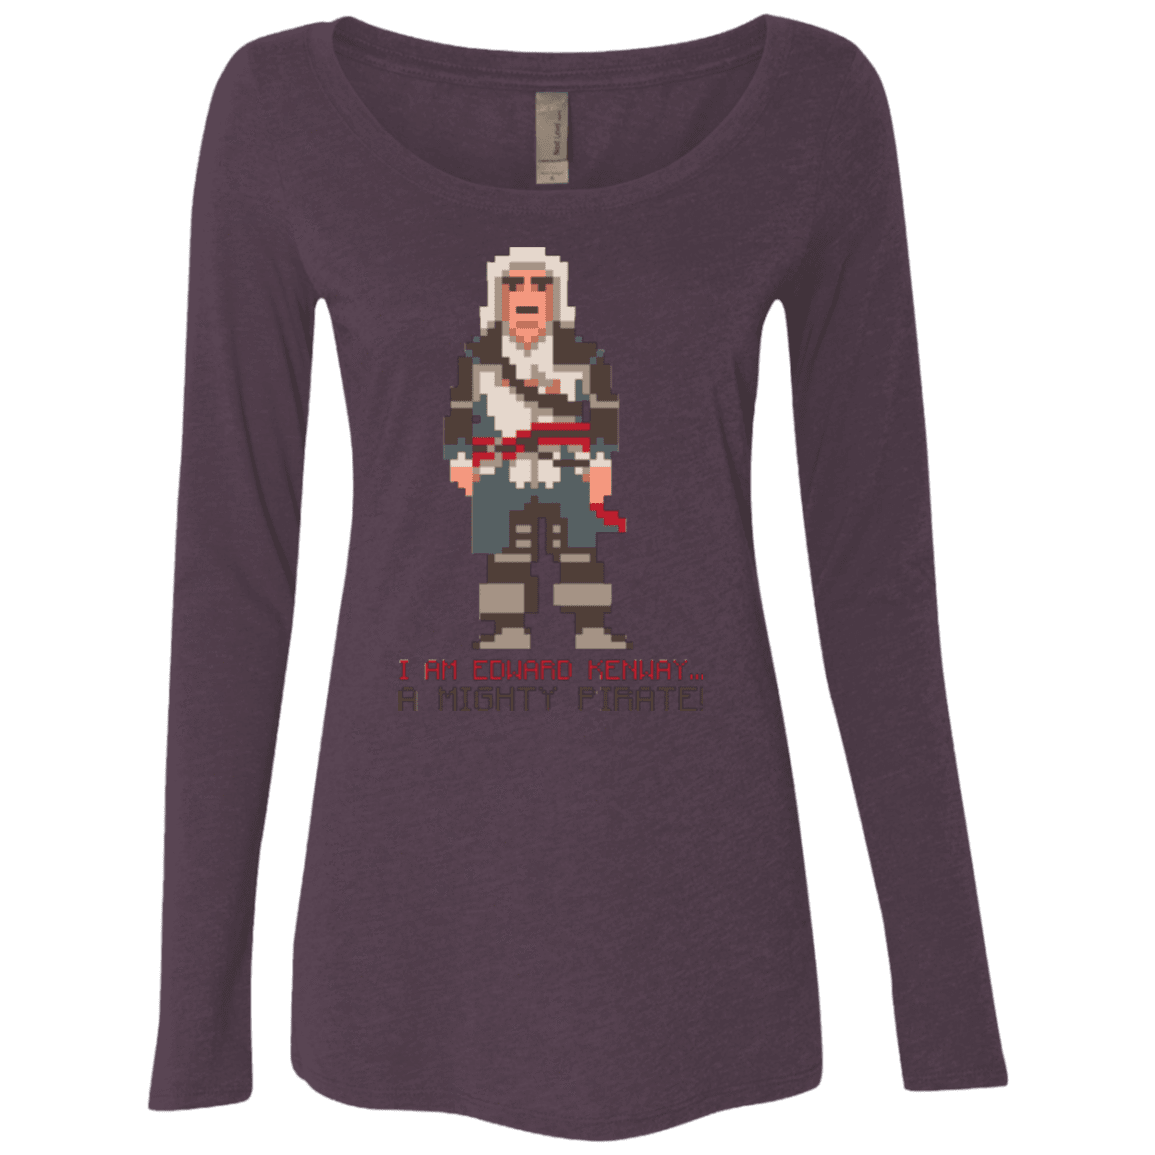 T-Shirts Vintage Purple / Small A Mighty Pirate Women's Triblend Long Sleeve Shirt